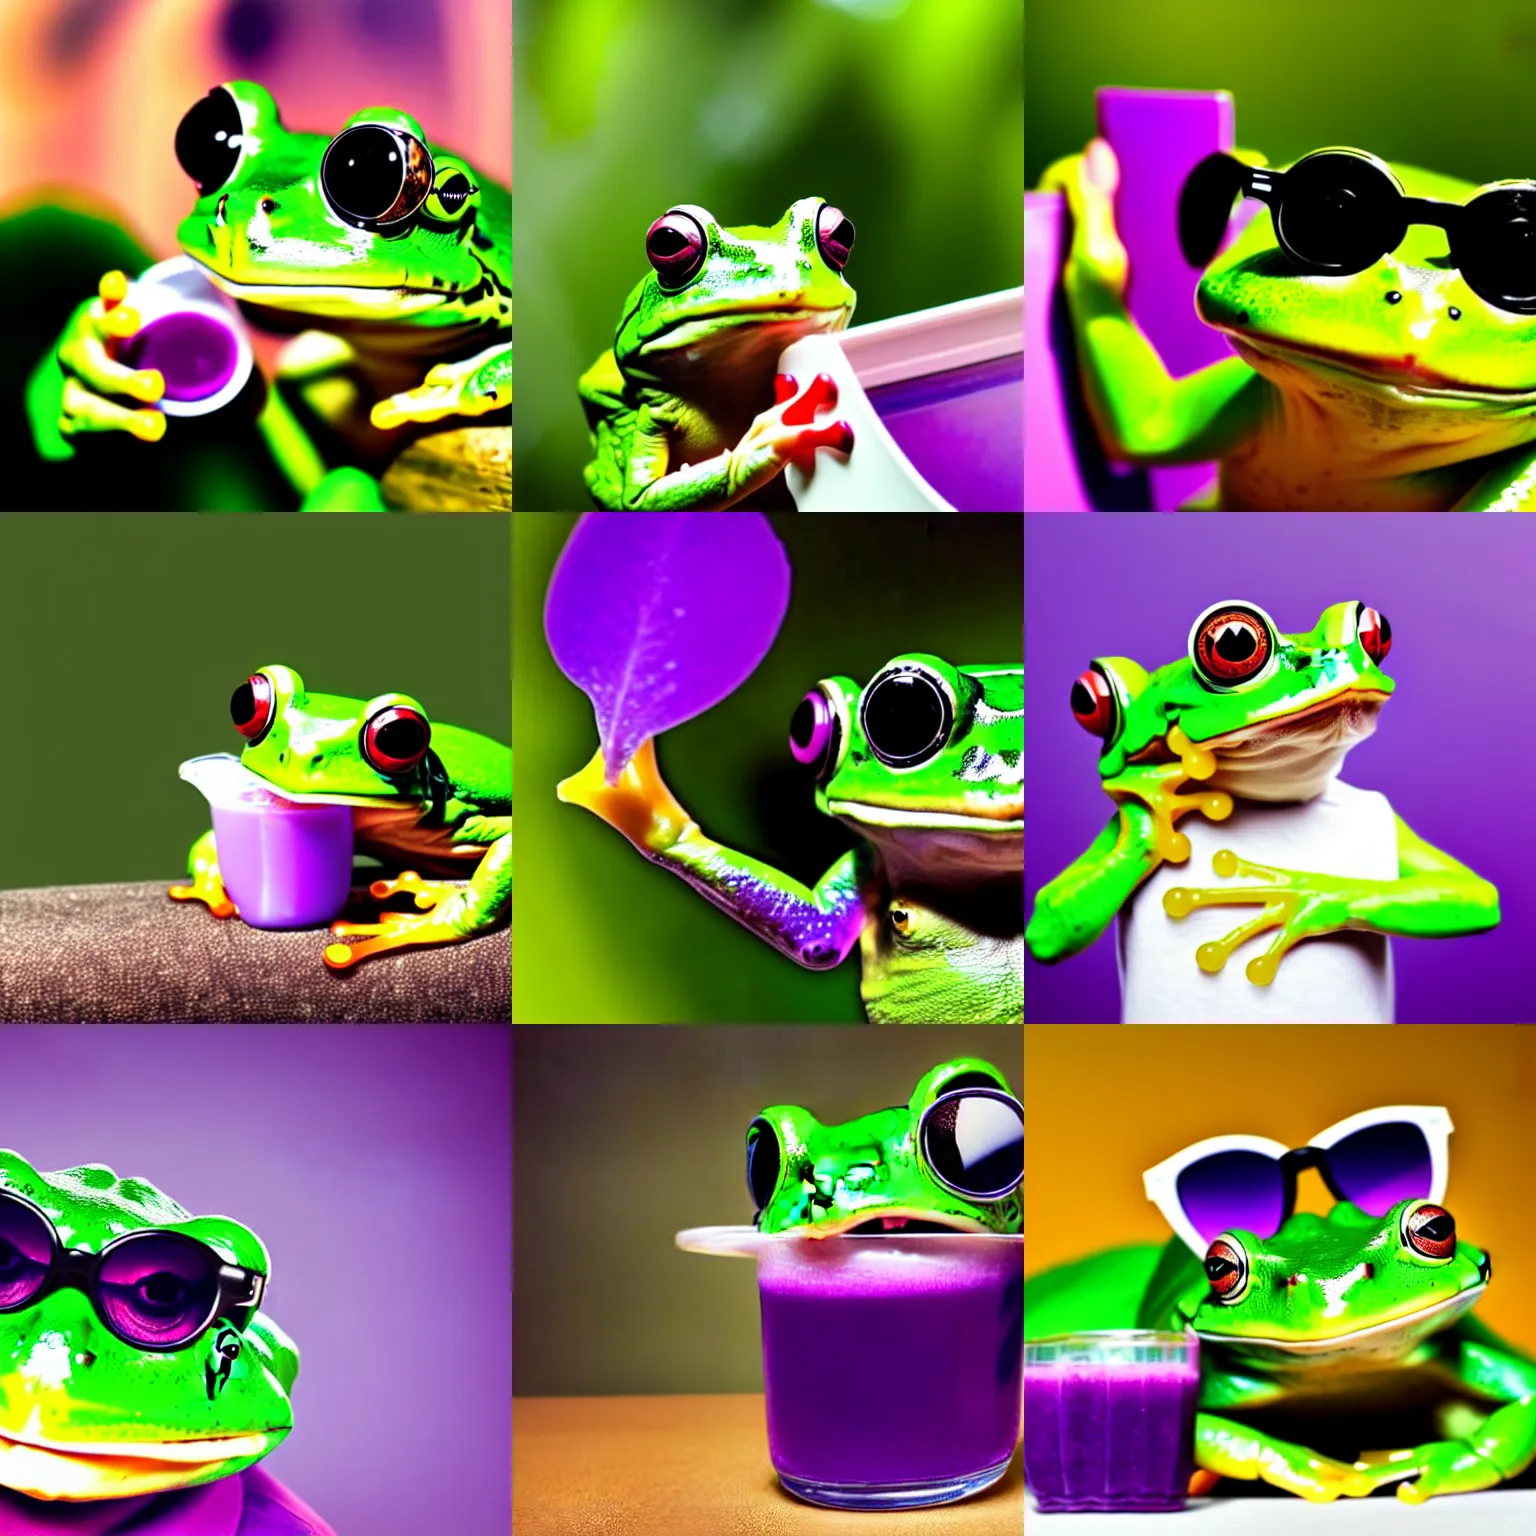 Prompt: a cute green frog with white - framed sunglasses on his face wearing a black shirt while drinking from a purple juice box, macro photography